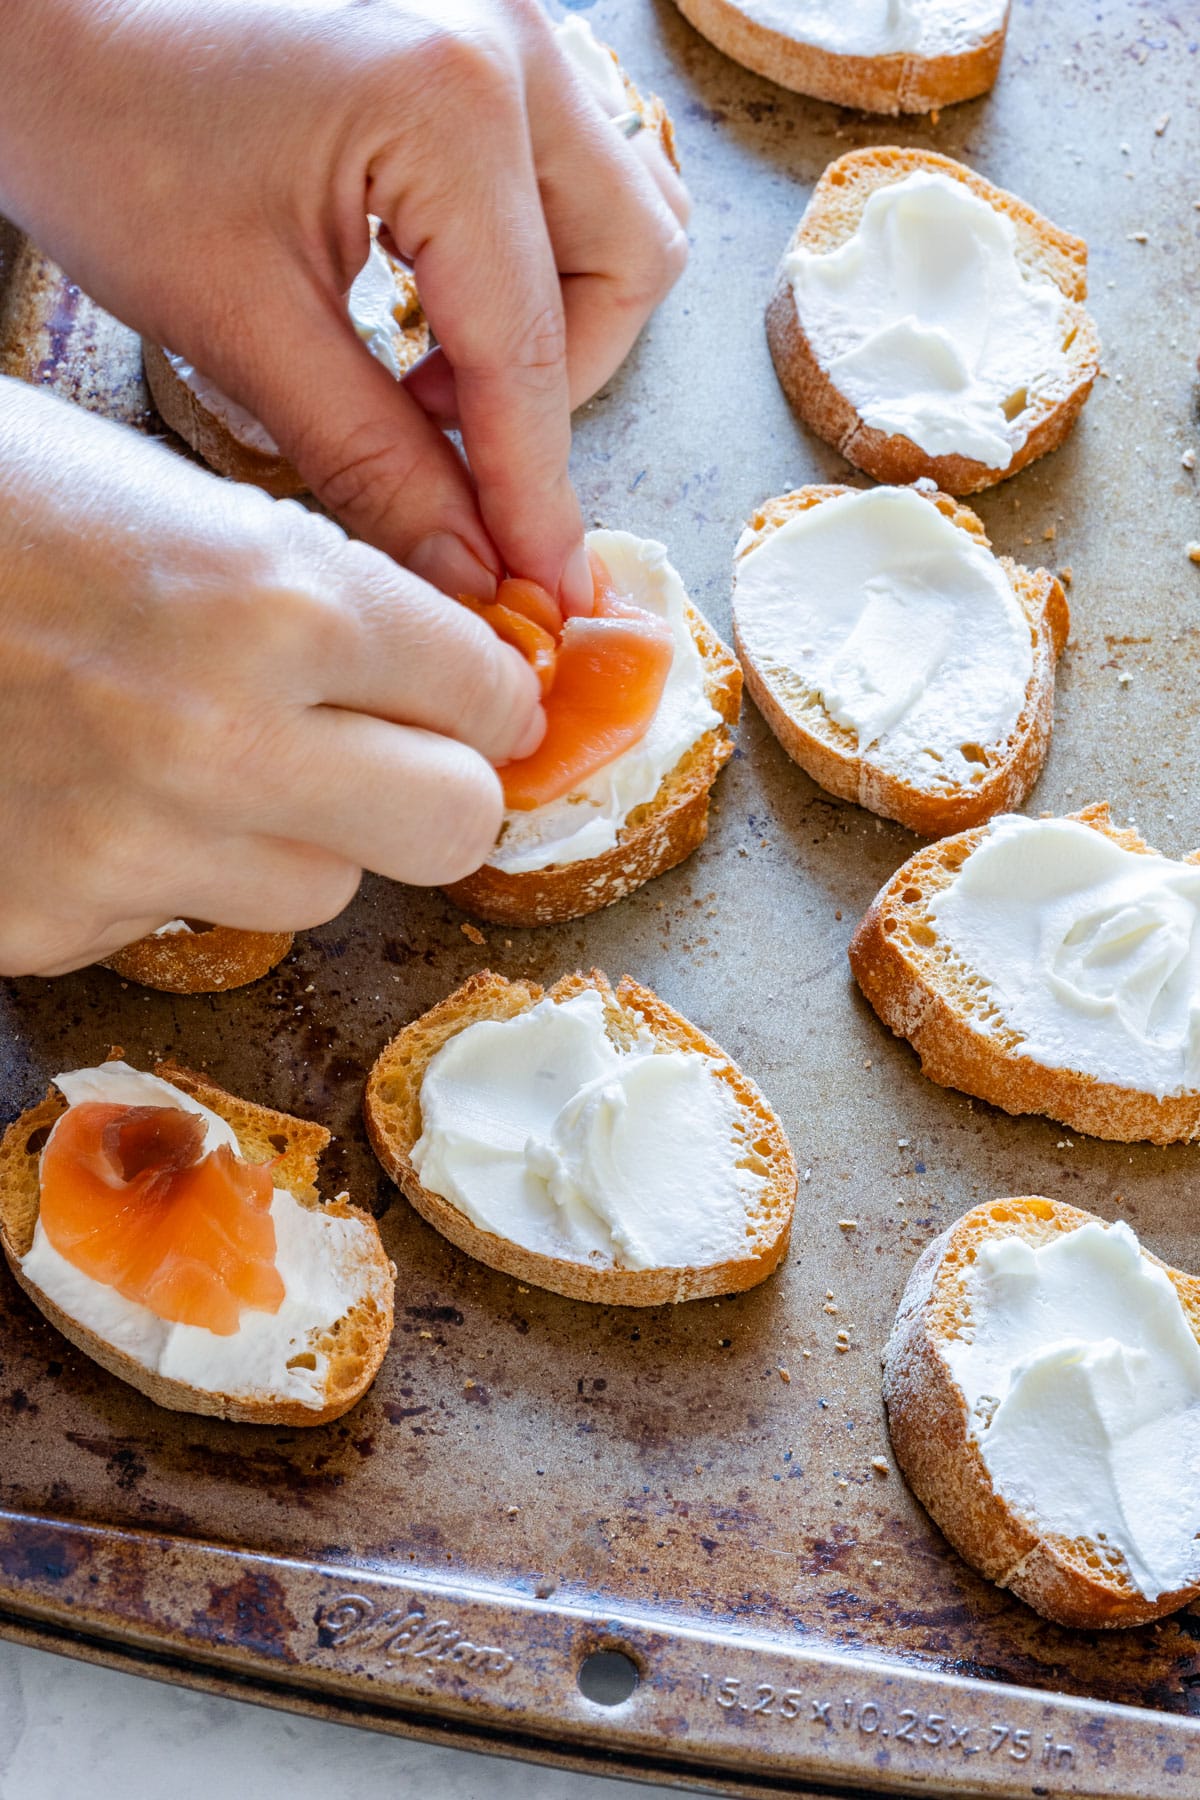 Showing how to make crostini with smoked salmon and cream cheese.